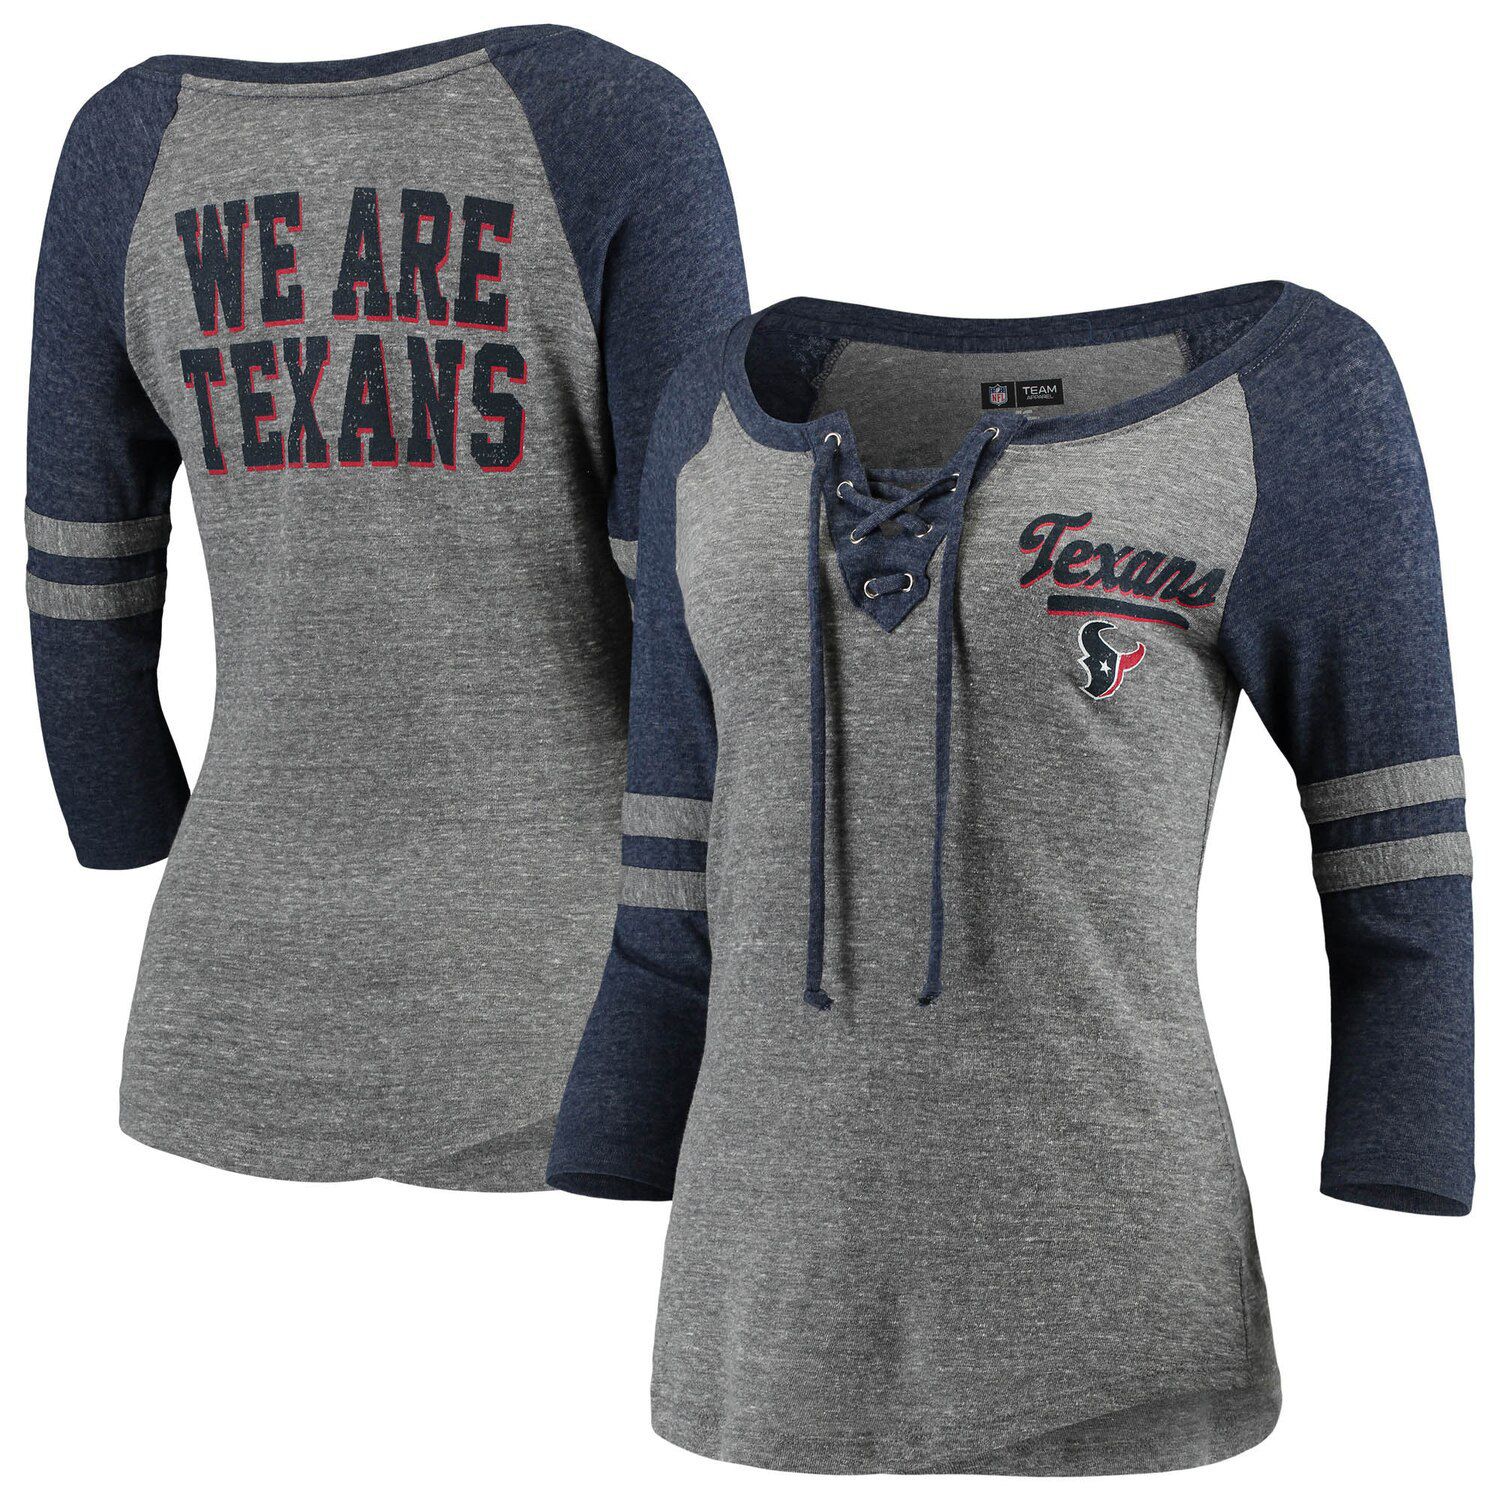 we are texans t shirt